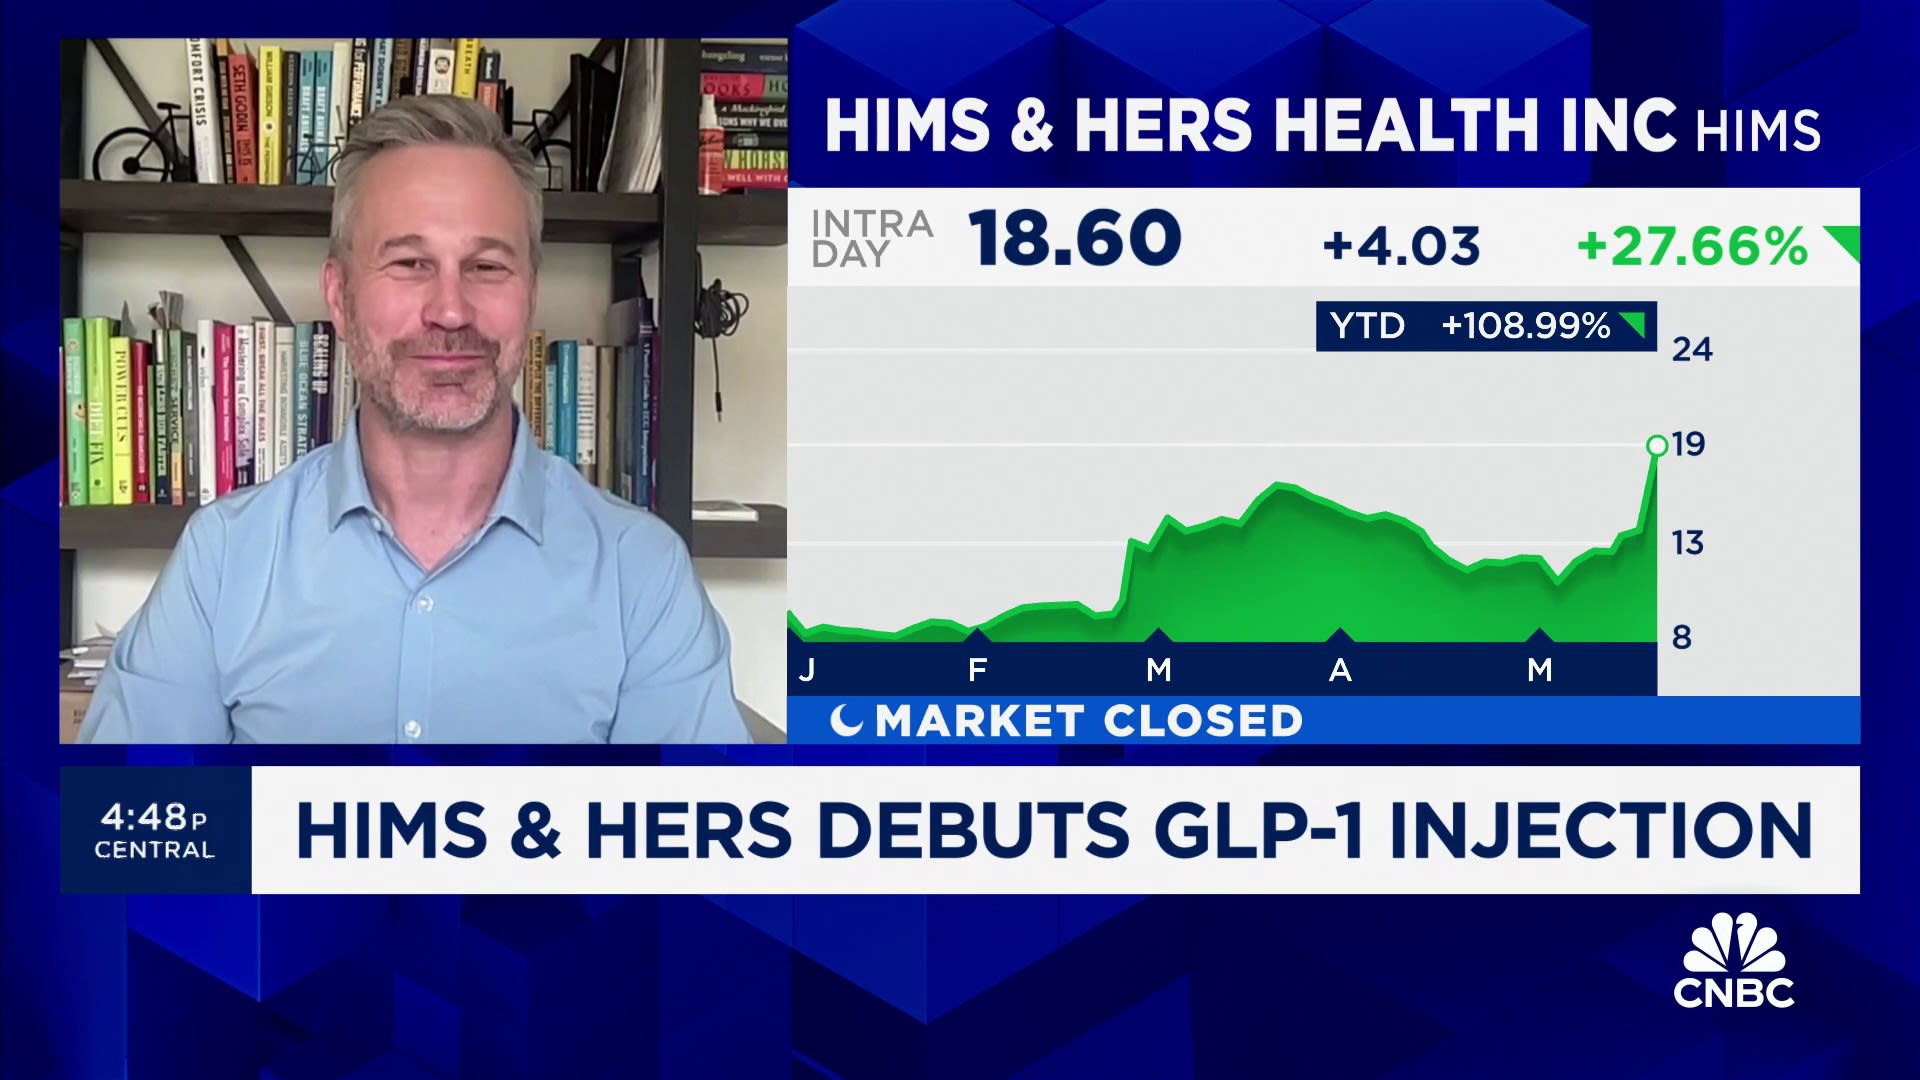 Dr. Craig Primack talks Hims & Hers launching its own GLP-1 offering as demand rises